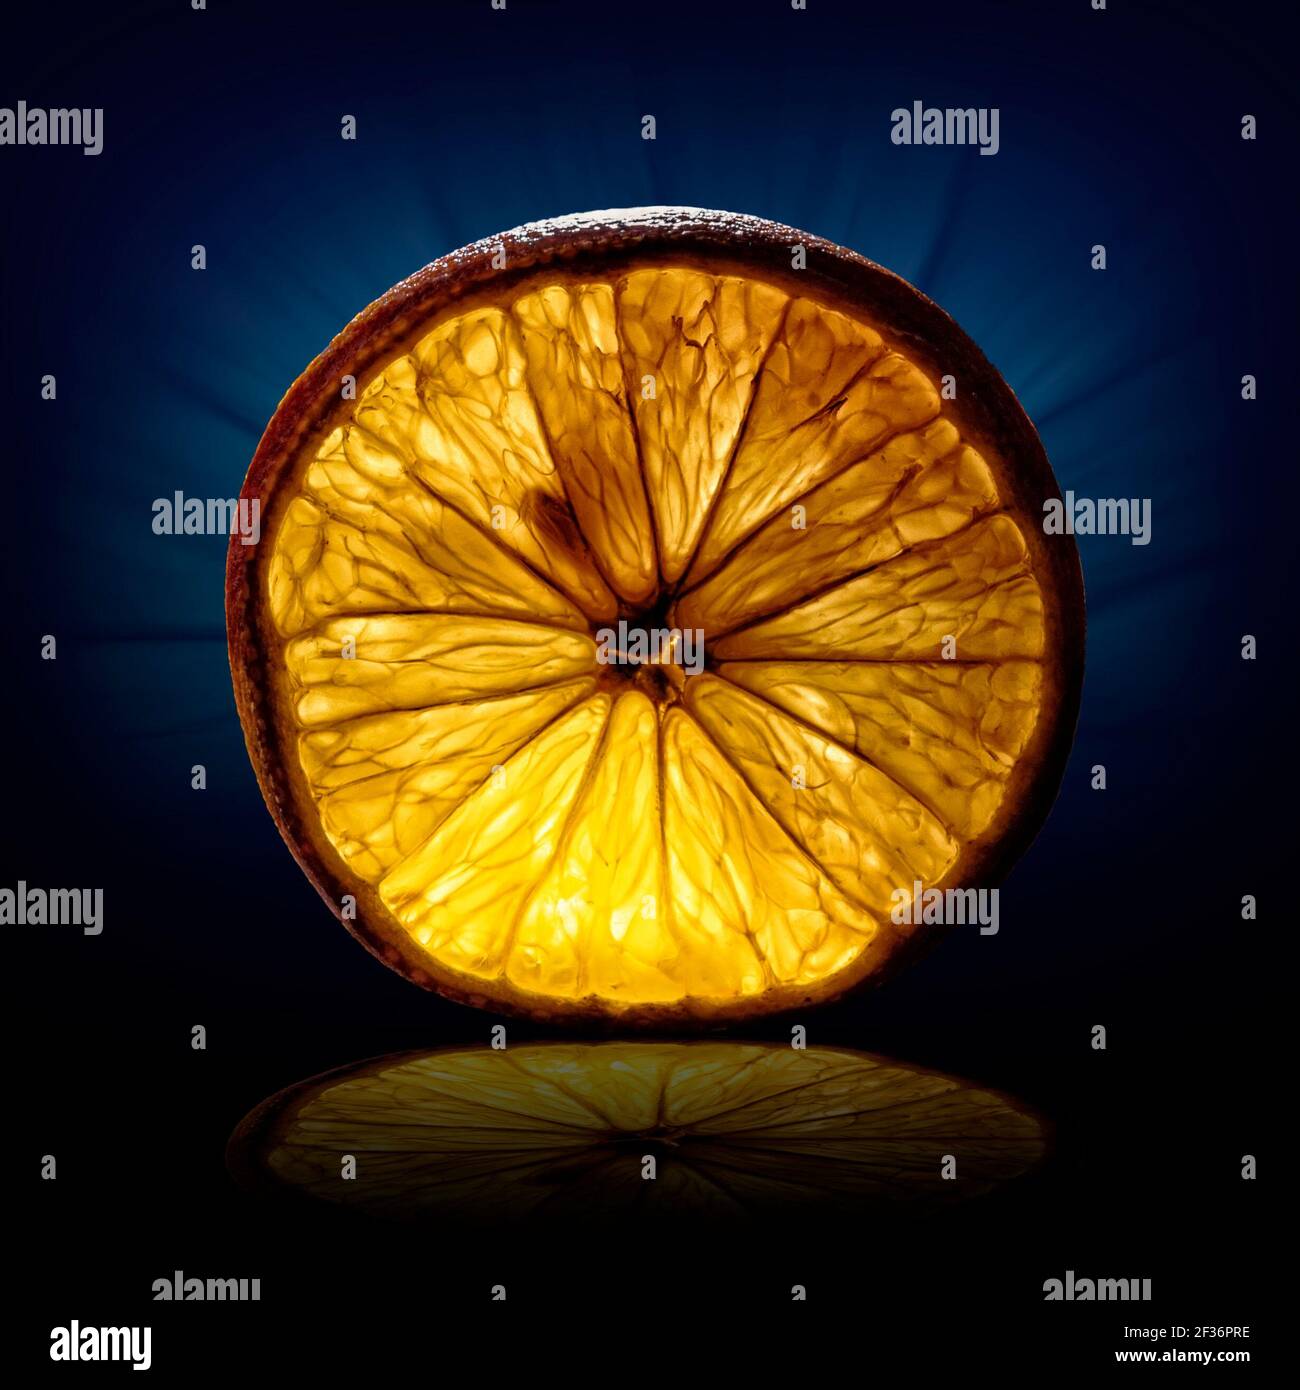 creative image of a slice of orange view on backlight on dark blue background Stock Photo